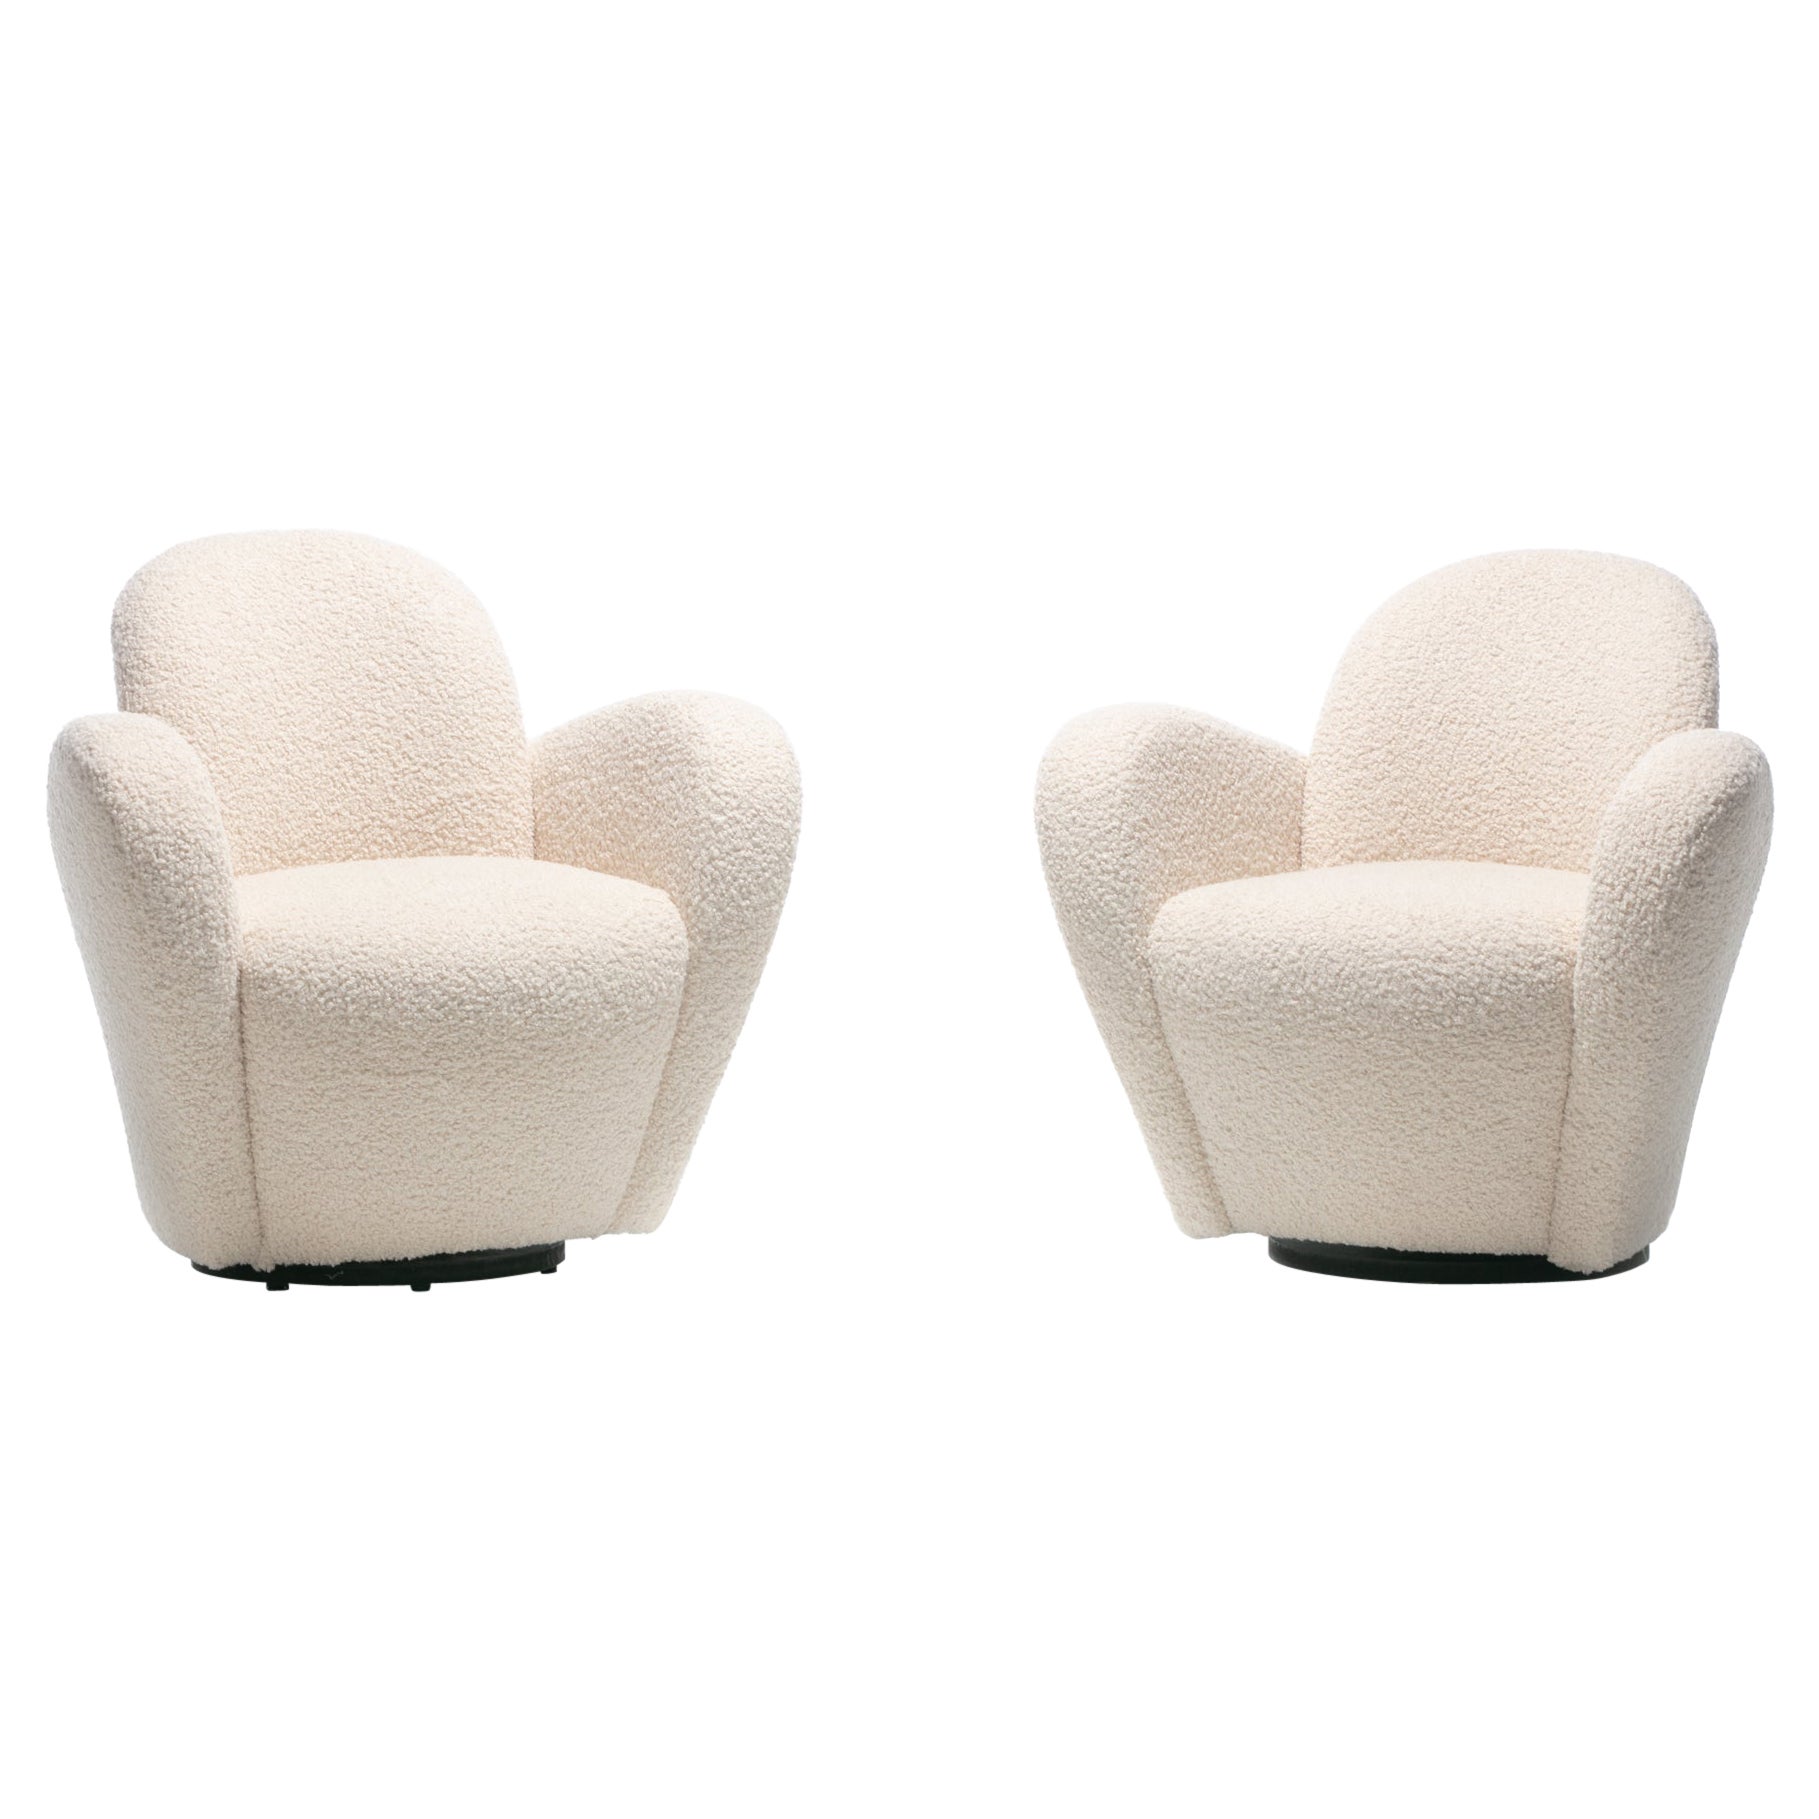 Pair of Michael Wolk Swivel Lounge Chairs in Ivory Bouclé